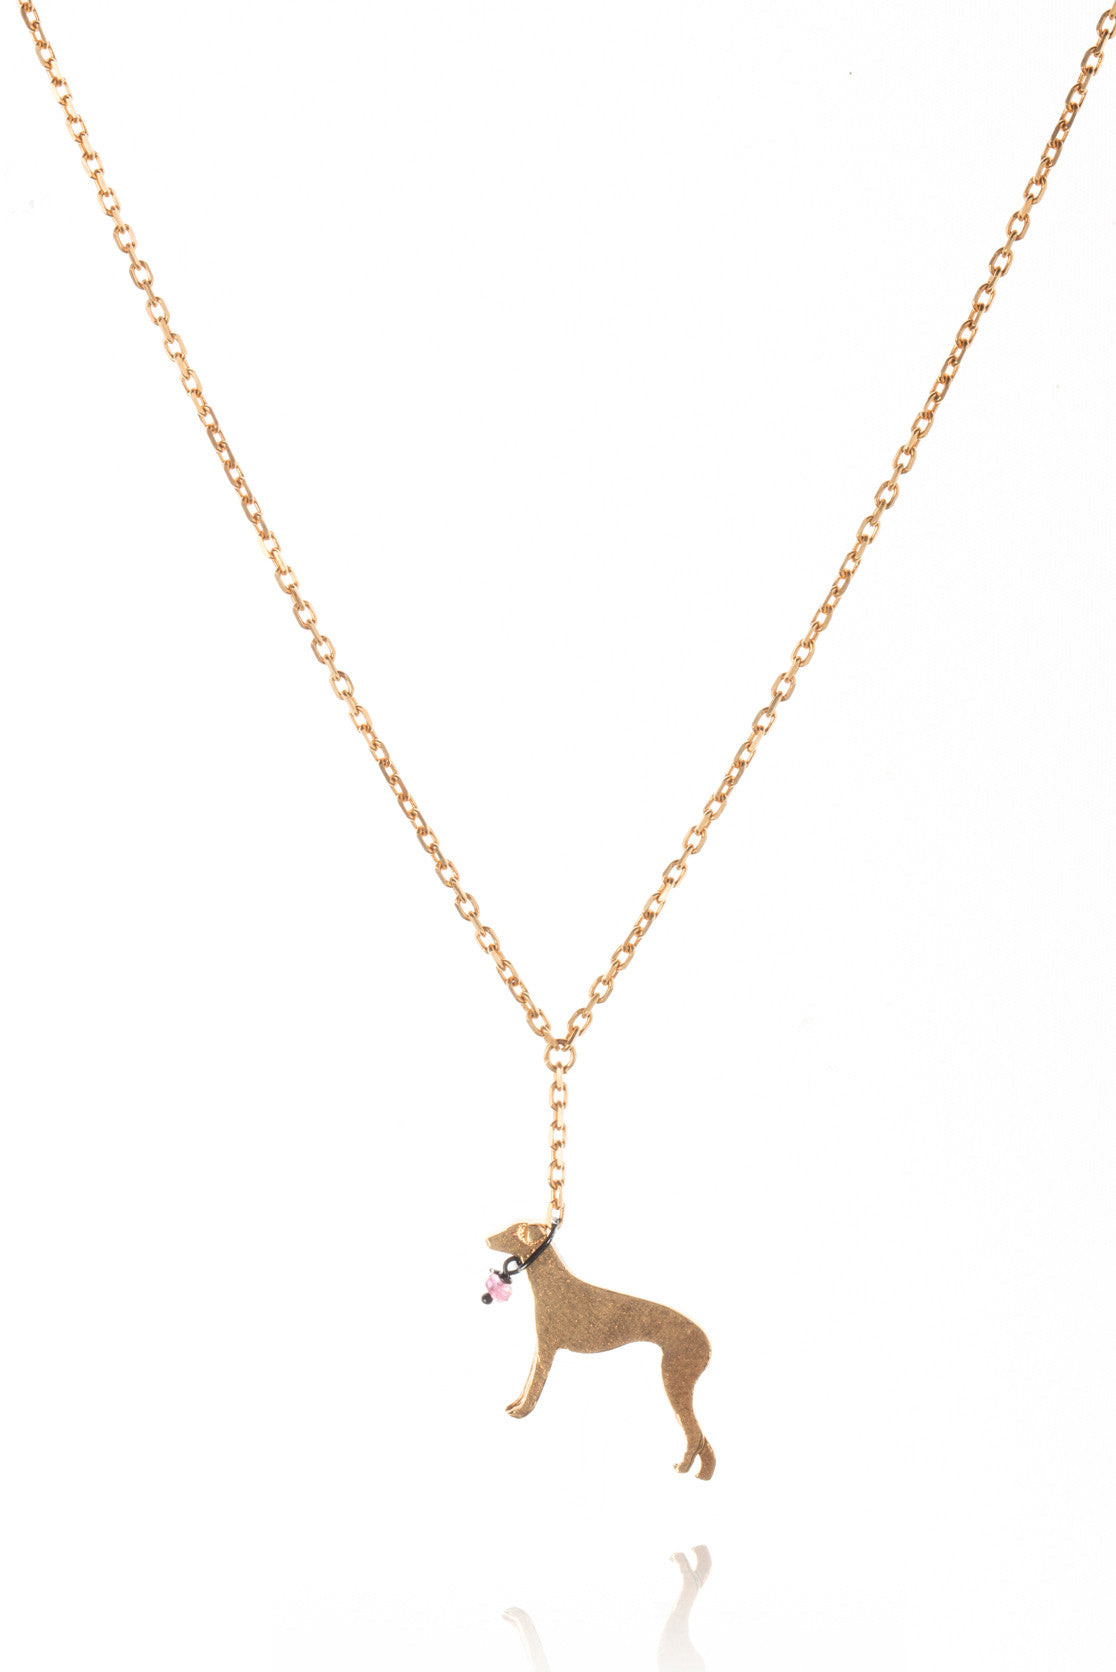 Greyhound Necklace in silver, gold plate or black